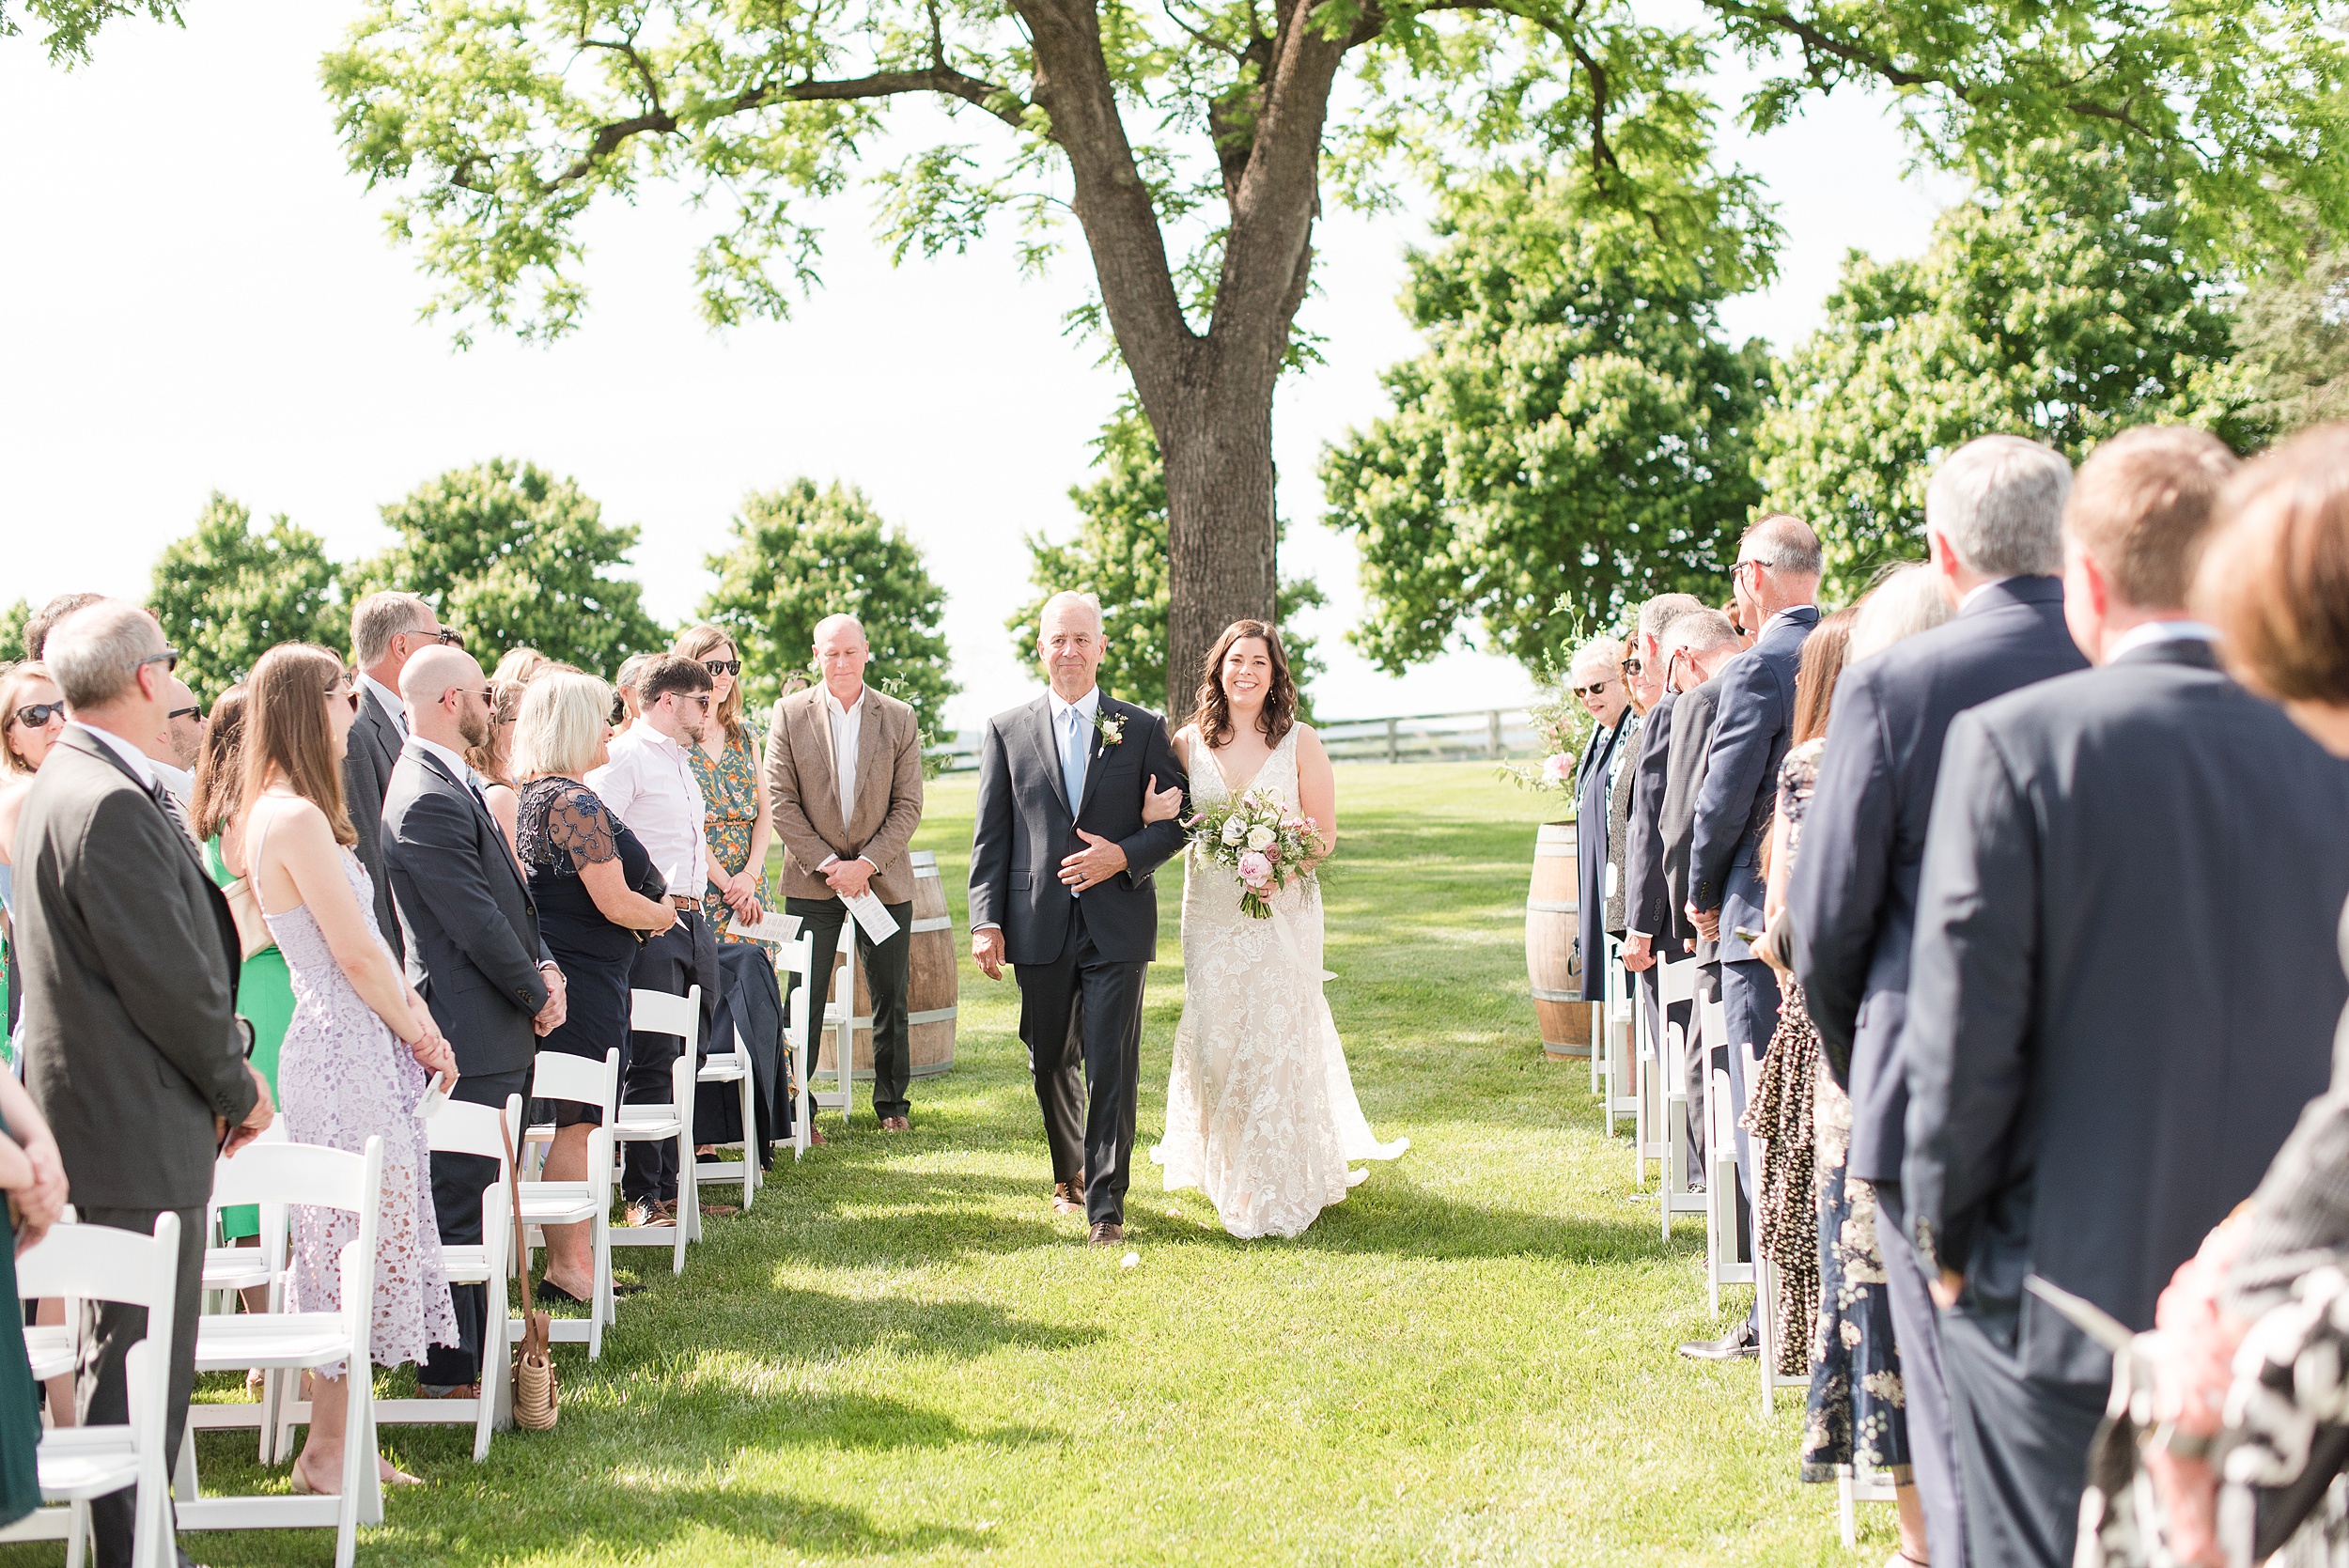 A father walks his daughter down the aisle at her outdoor Bluebird Manor wedding ceremony